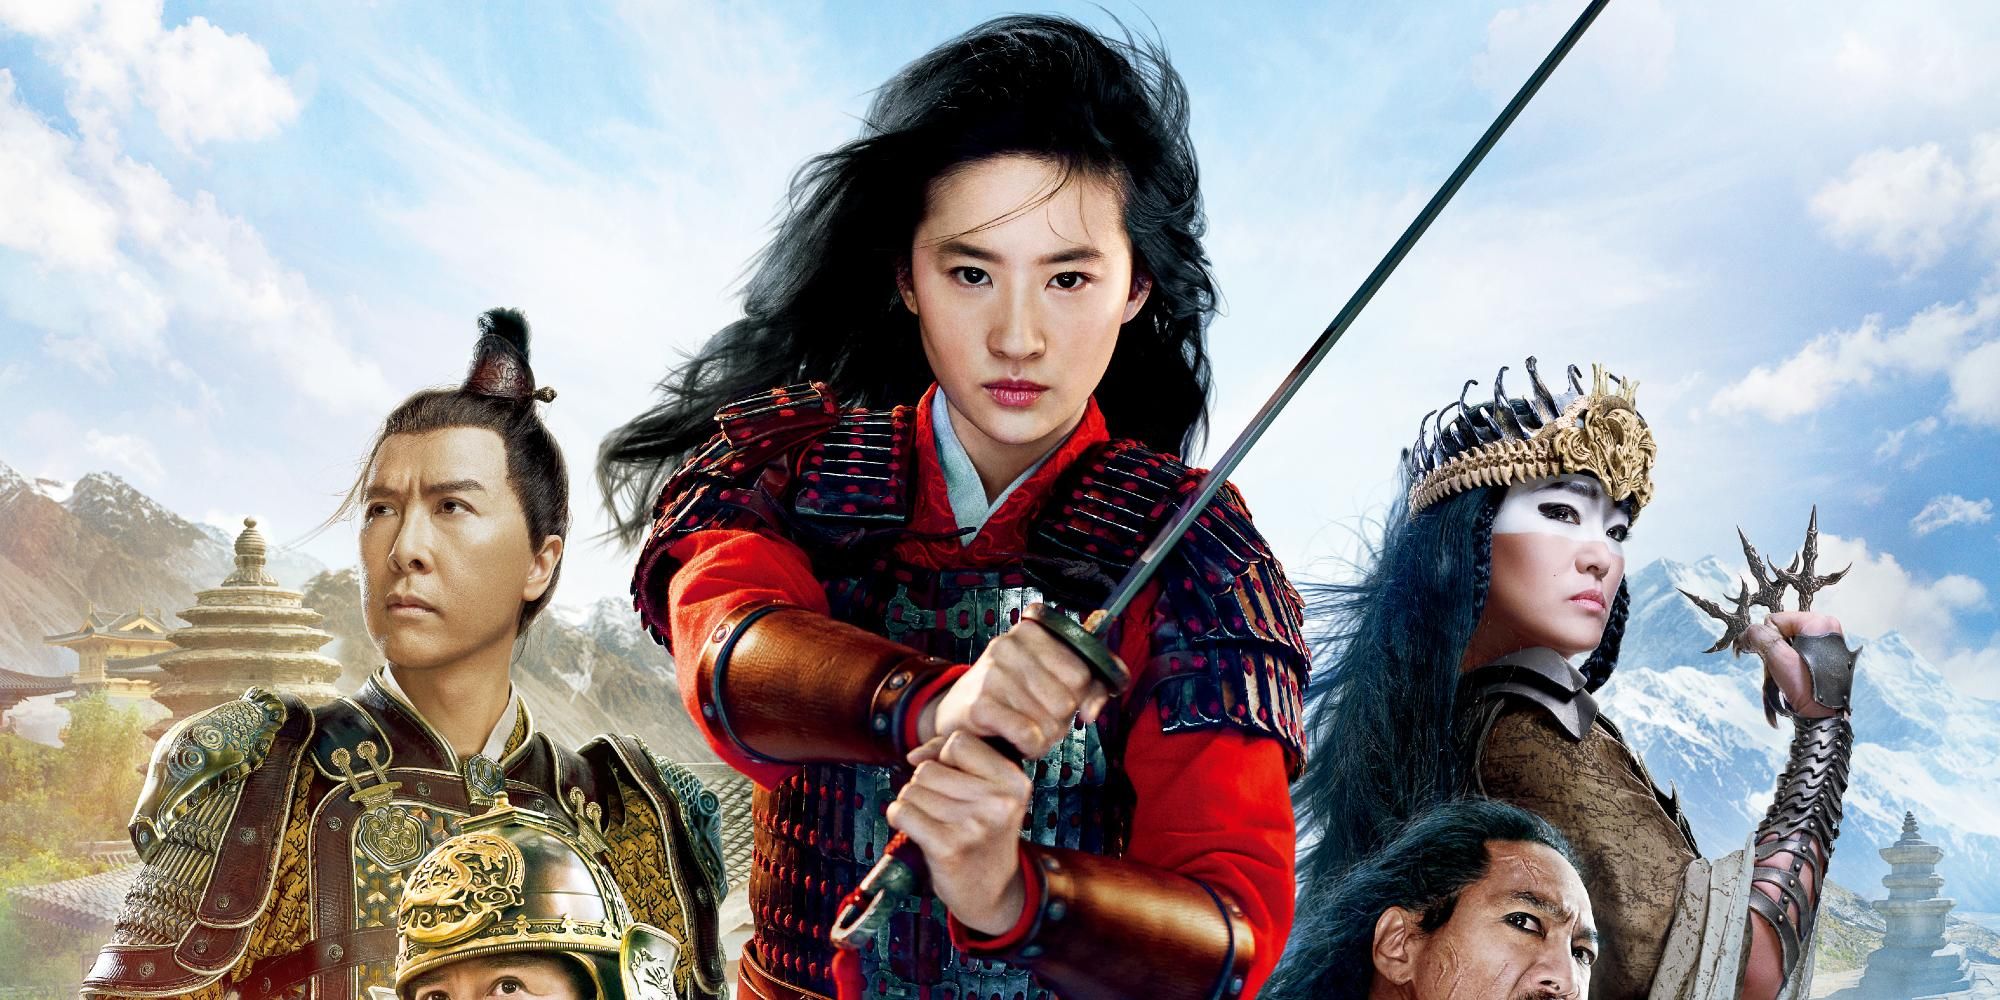 Disney Re-spins ‘Mulan’ into a Proto-Fantasy Epic, But is it a Film Worth Paying Extra For?